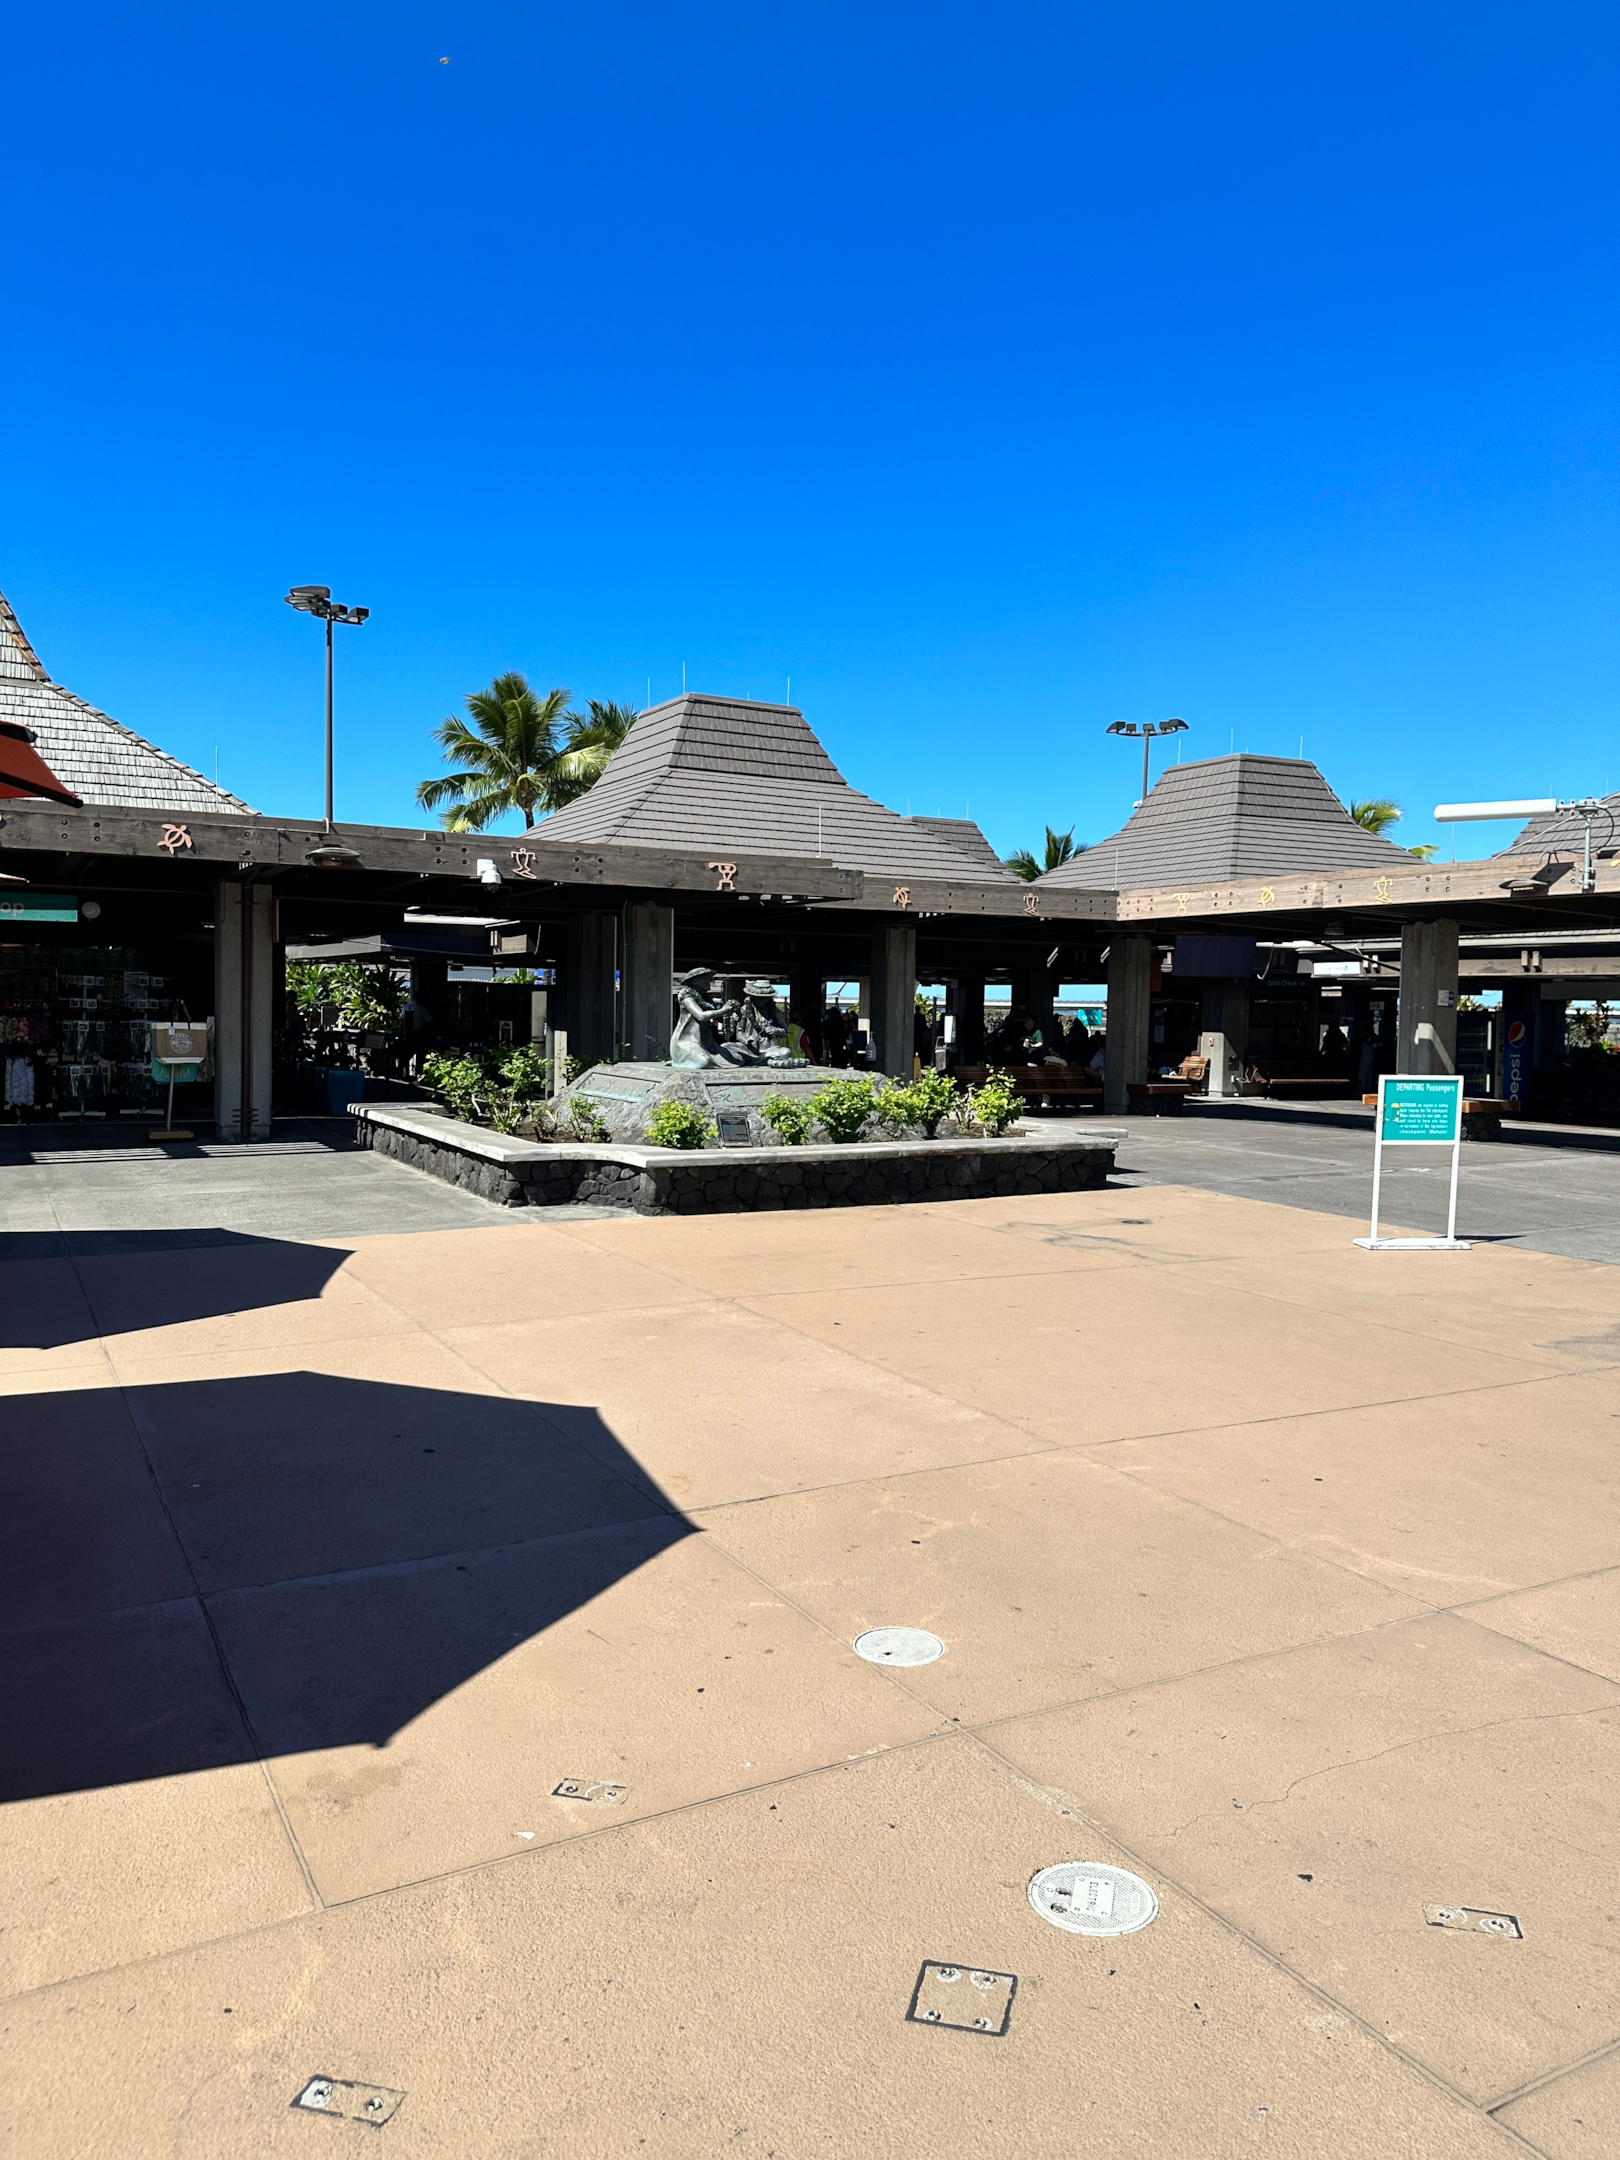 Kona Airport with tiki hut style roofs and open air design